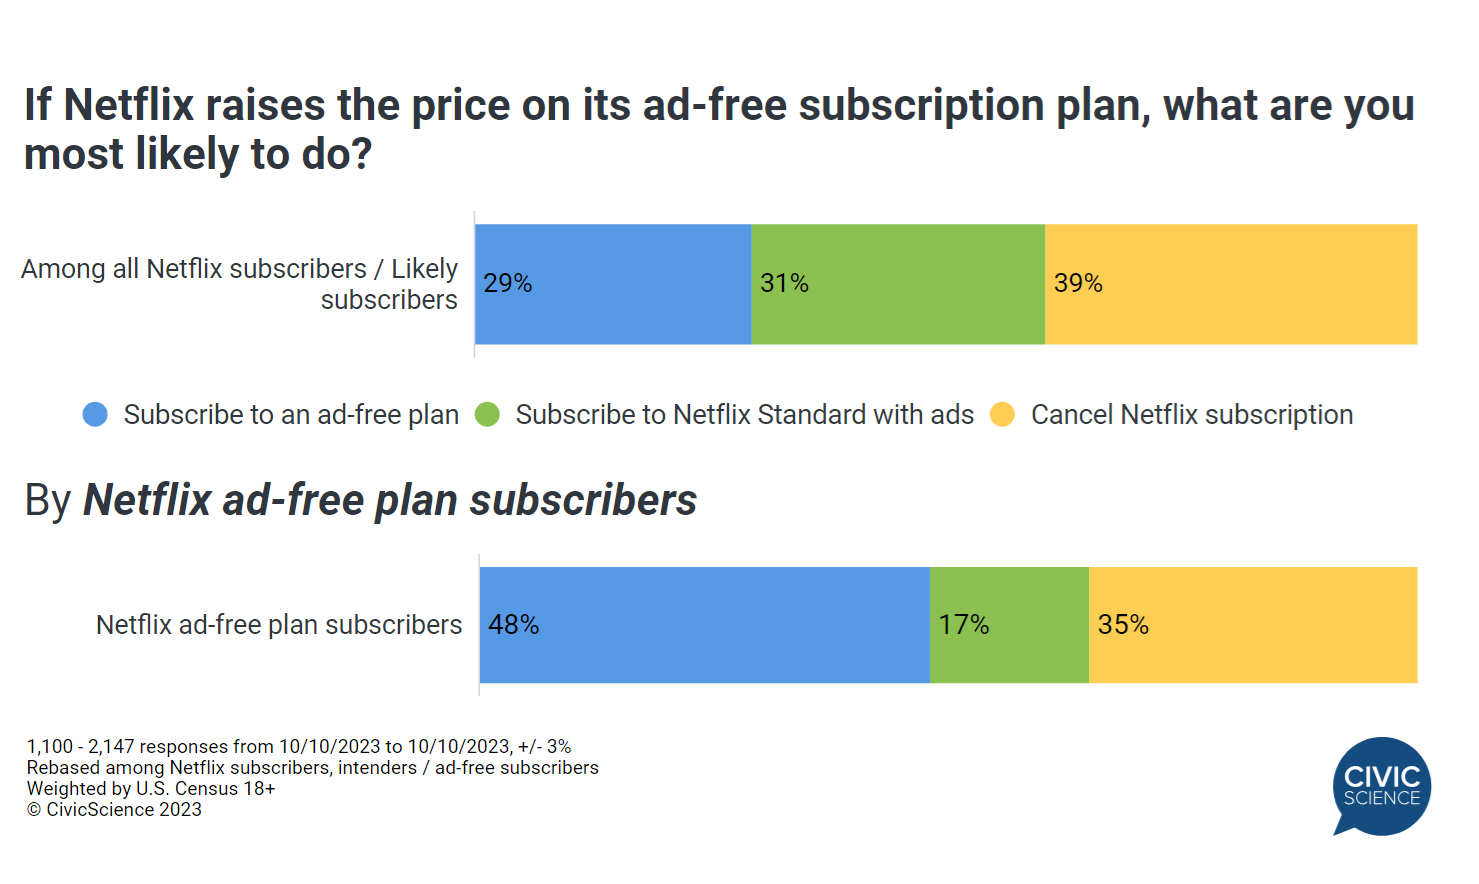 If Netflix raises the price on its ad-free subscription plan, what are you most likely to do?